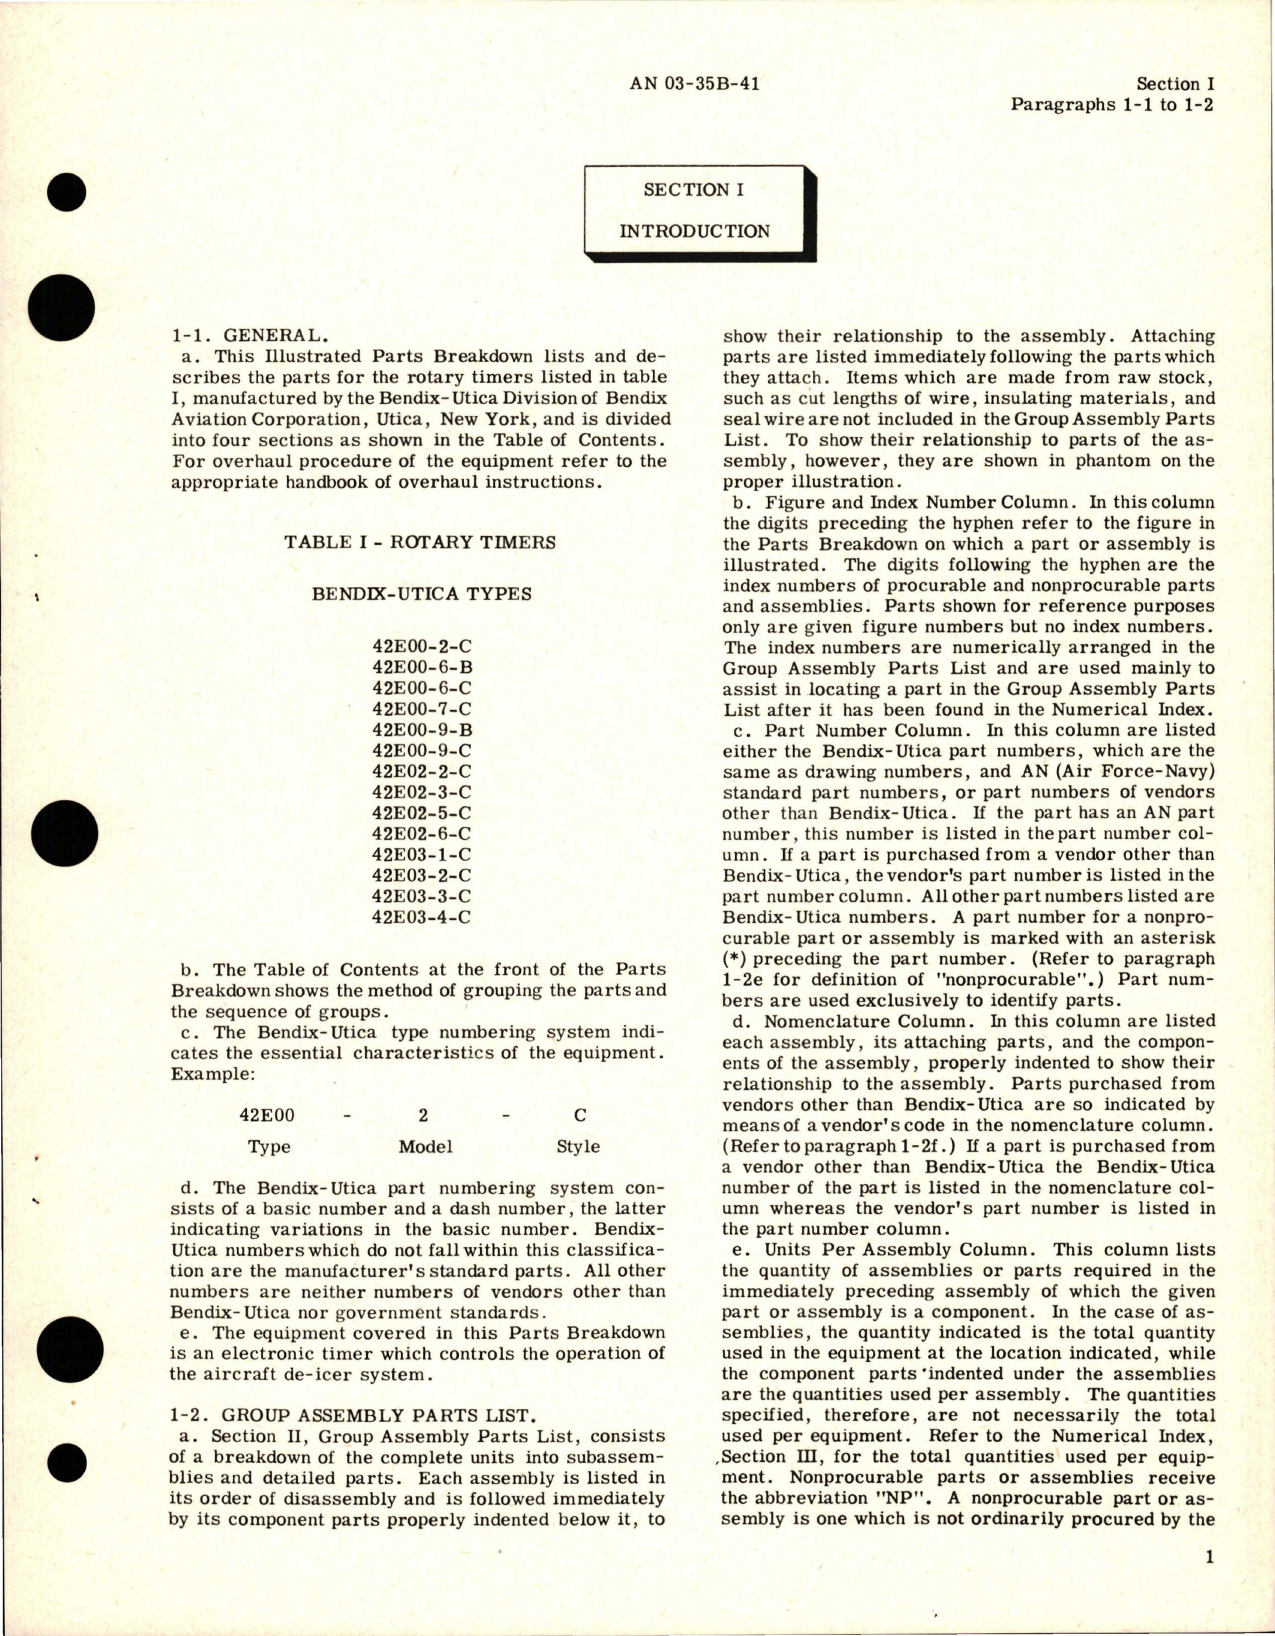 Sample page 7 from AirCorps Library document: Illustrated Parts Breakdown for Rotary Timers